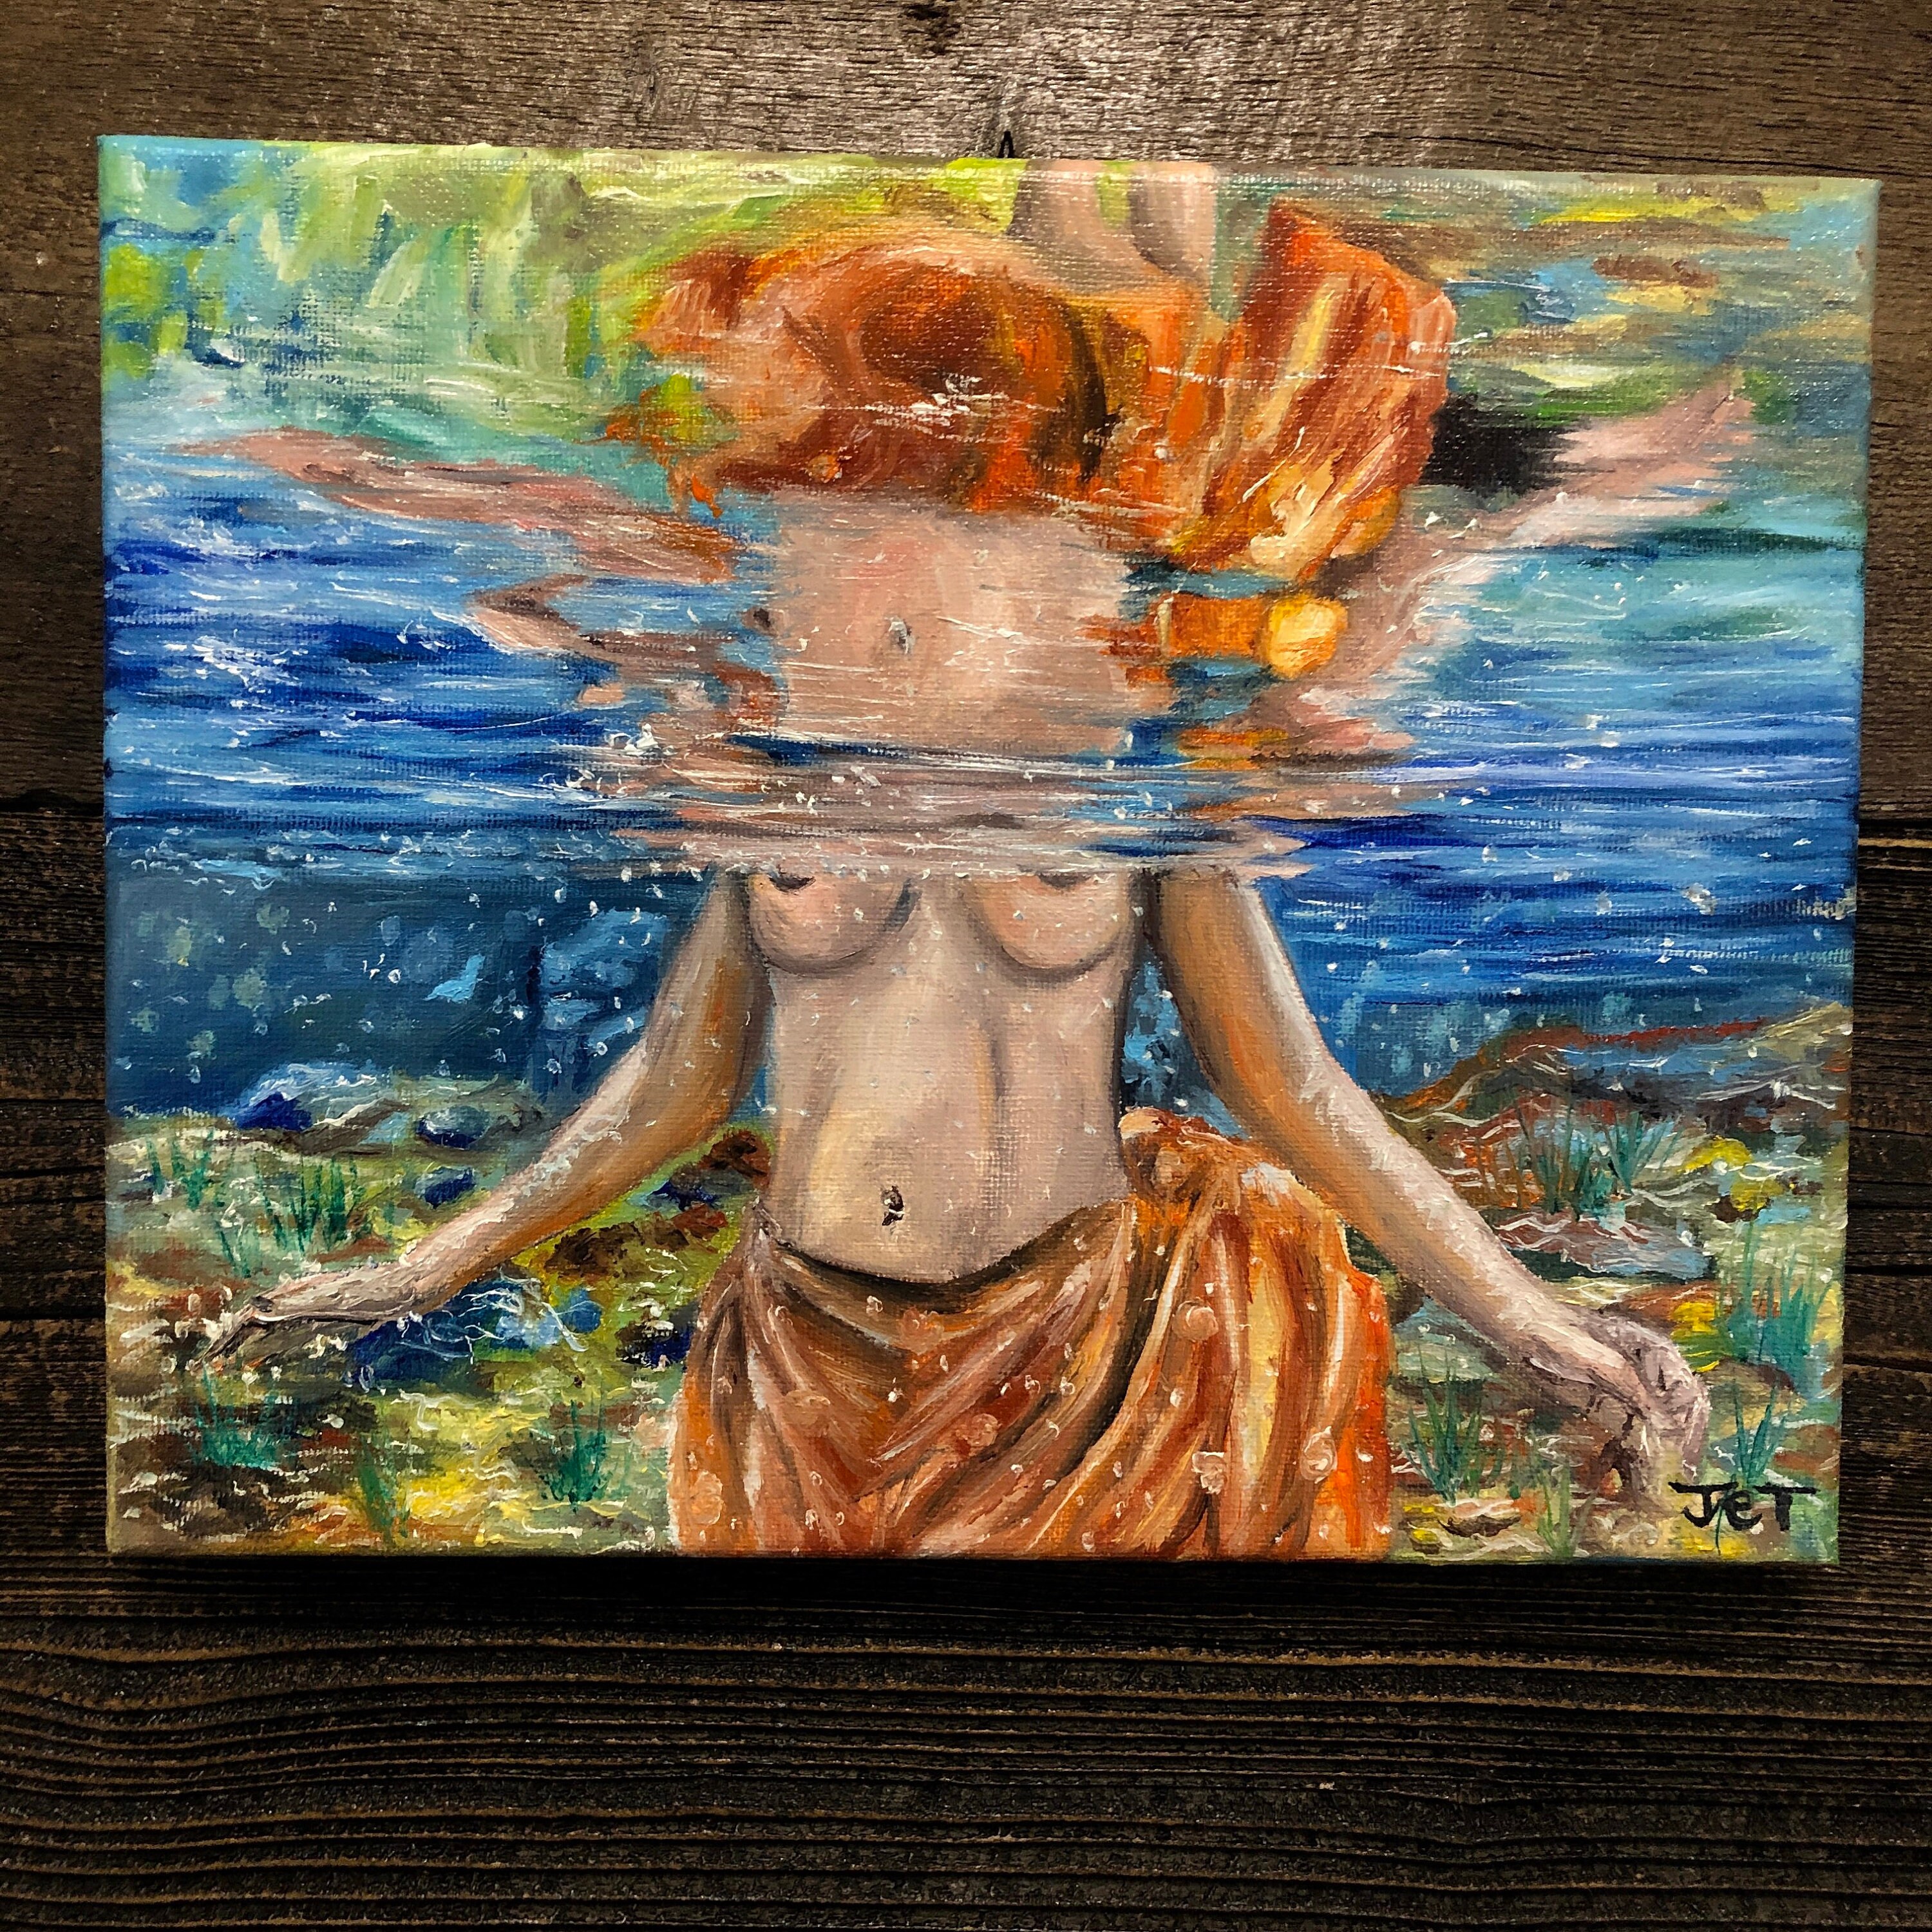 8x10 Inch Study Nude Woman Breasts Underwater Reflection Ocean Oil Paint on  Canvas Nipples Varnished Detailed Art Home Decor Gift Idea 